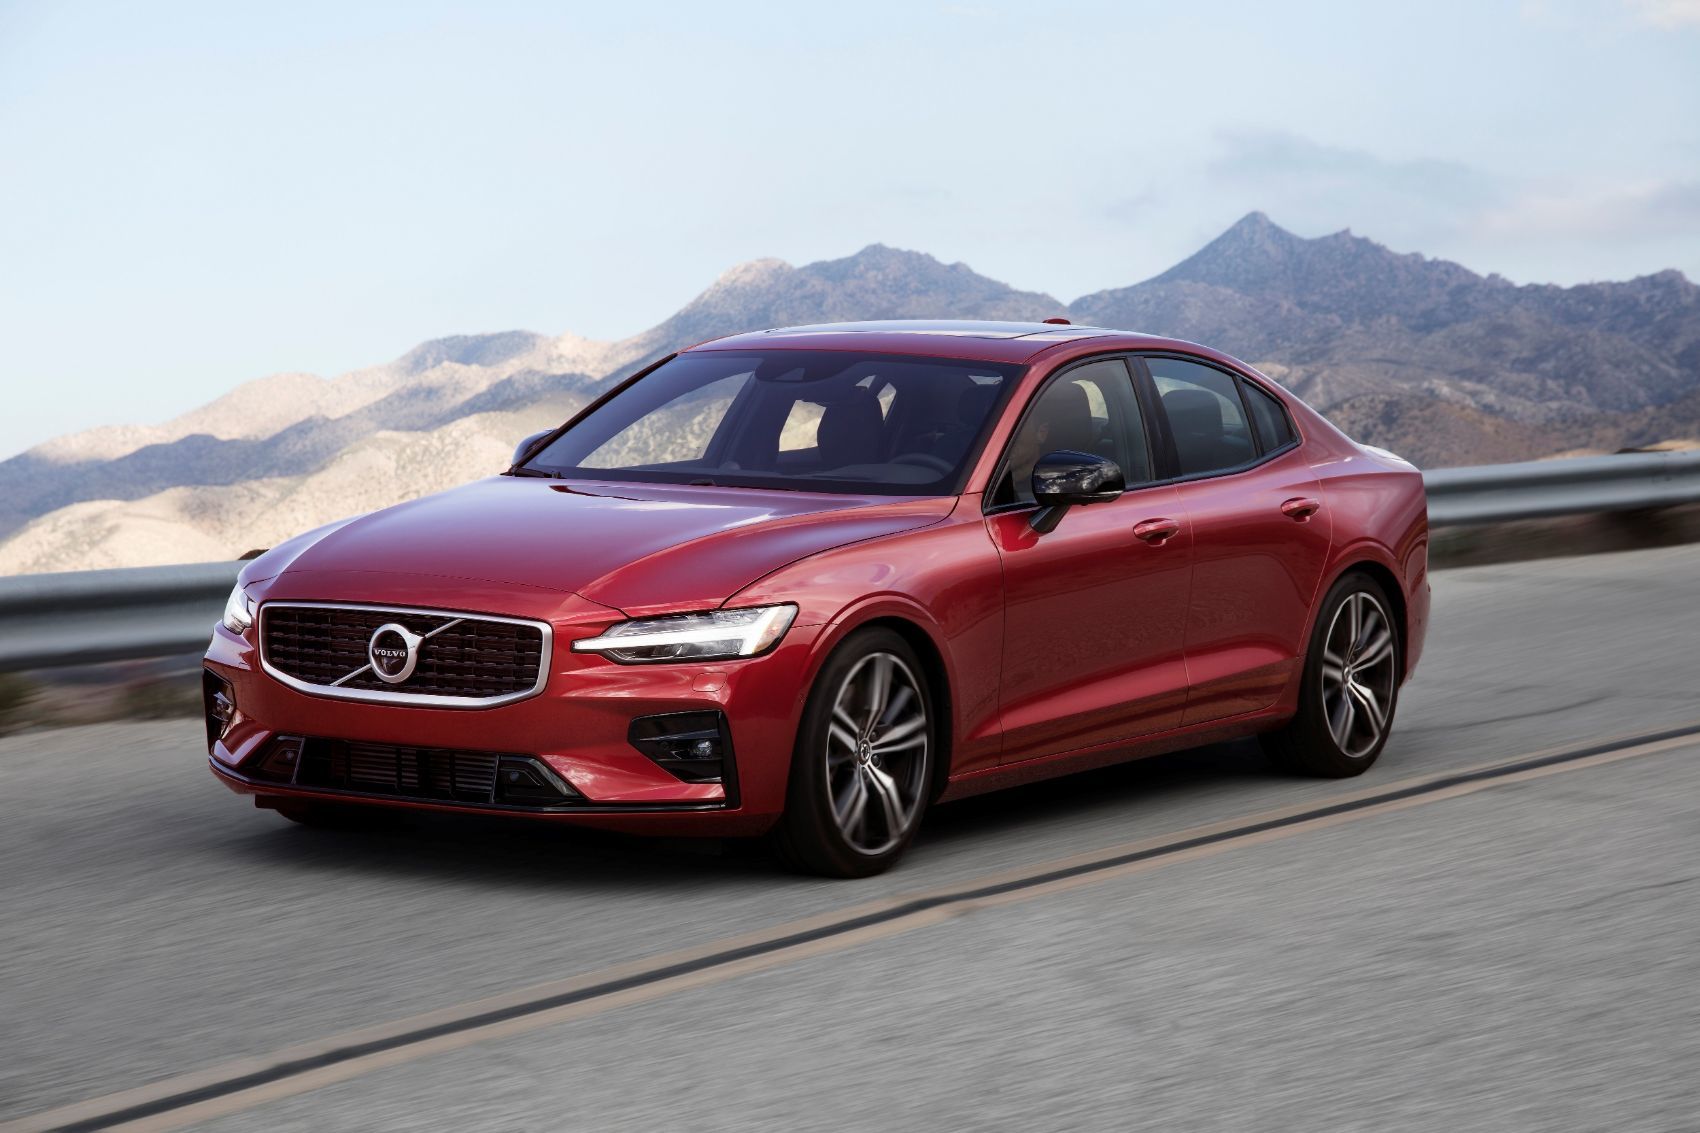 2020 Volvo S60 T8 Inscription Review: Not Grand But Still Good